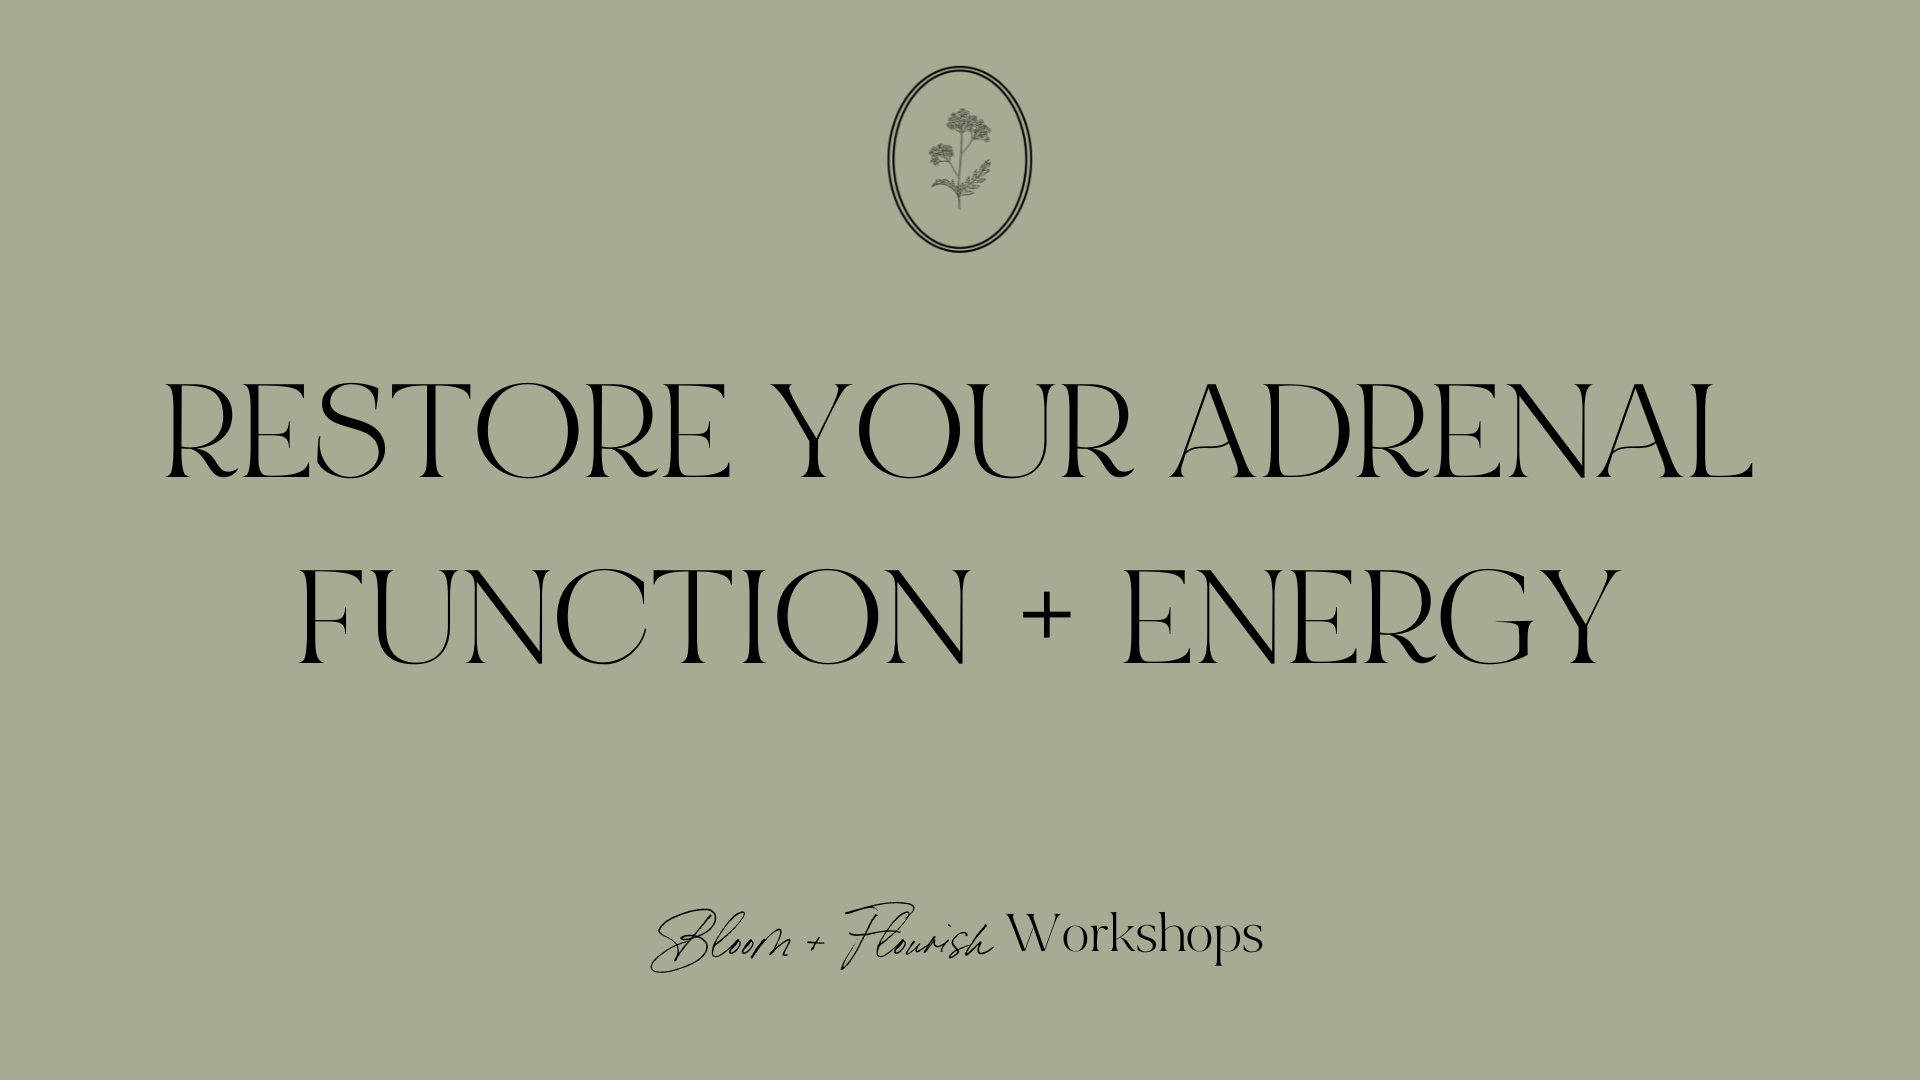 Image with a green background with a text that reeds "Restore Your Adrenal Function + Energy - Bloom + Flourish Workshops"